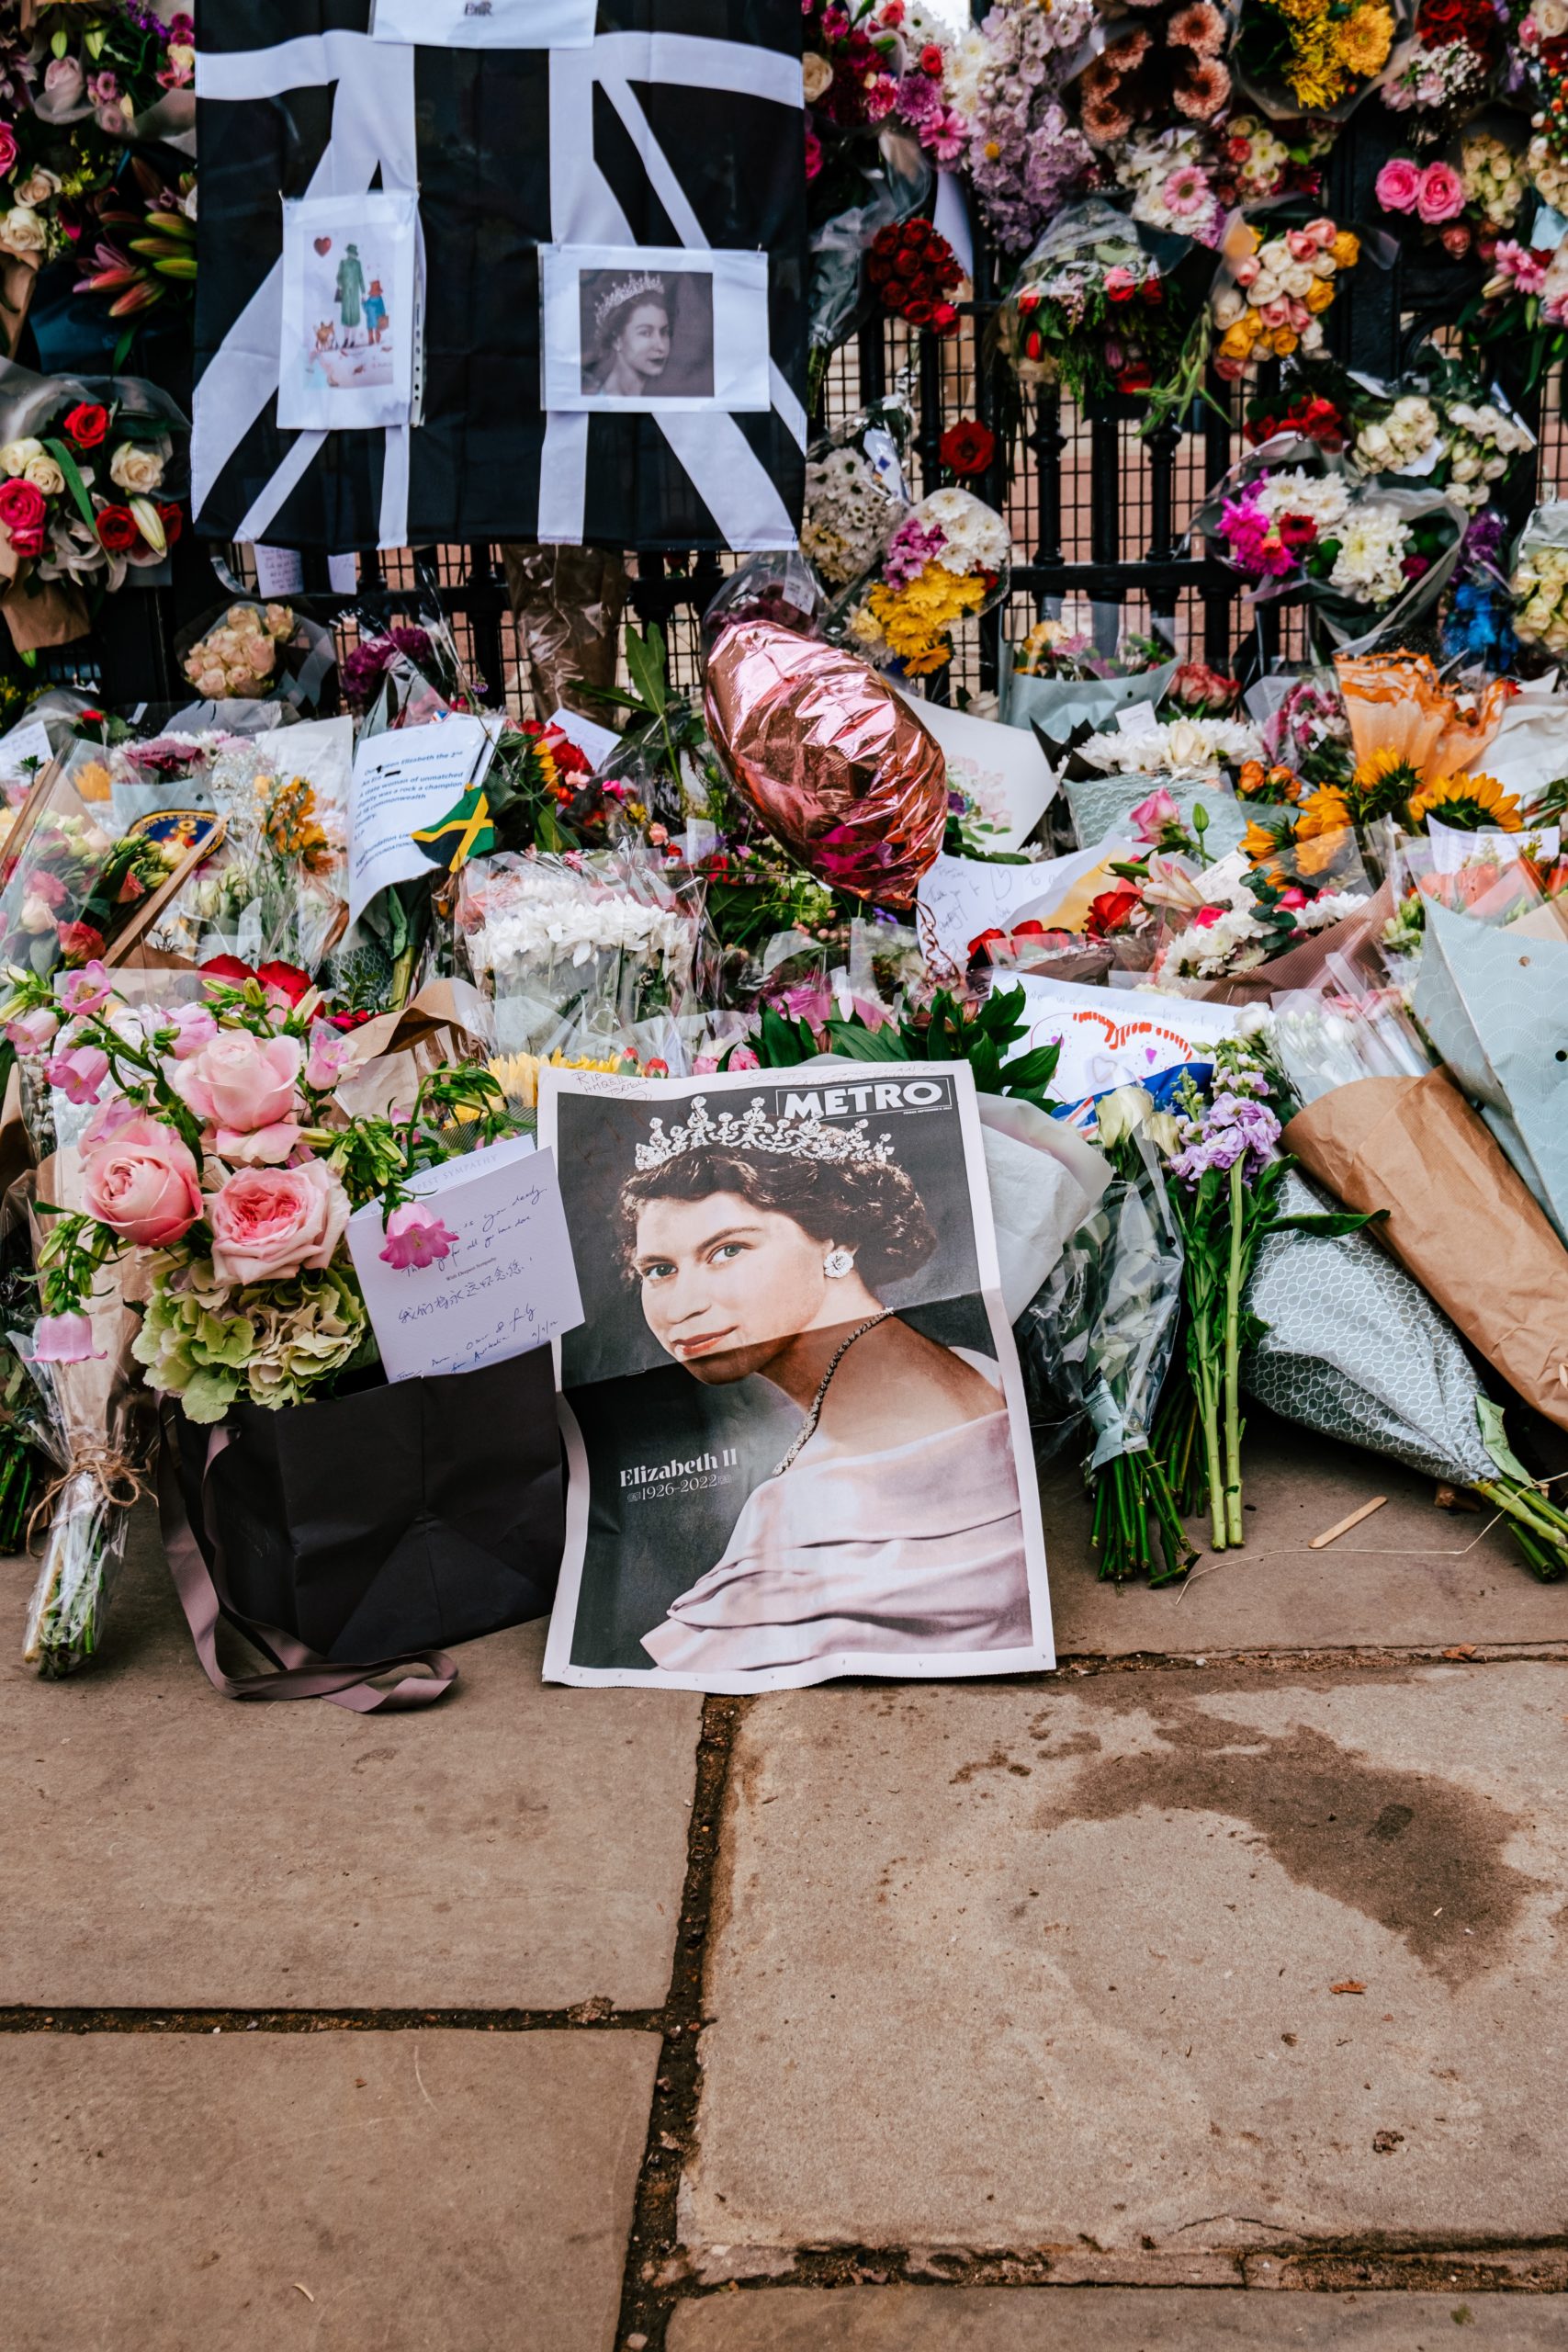 A photo of flowers and tributes to Queen Elizabeth II